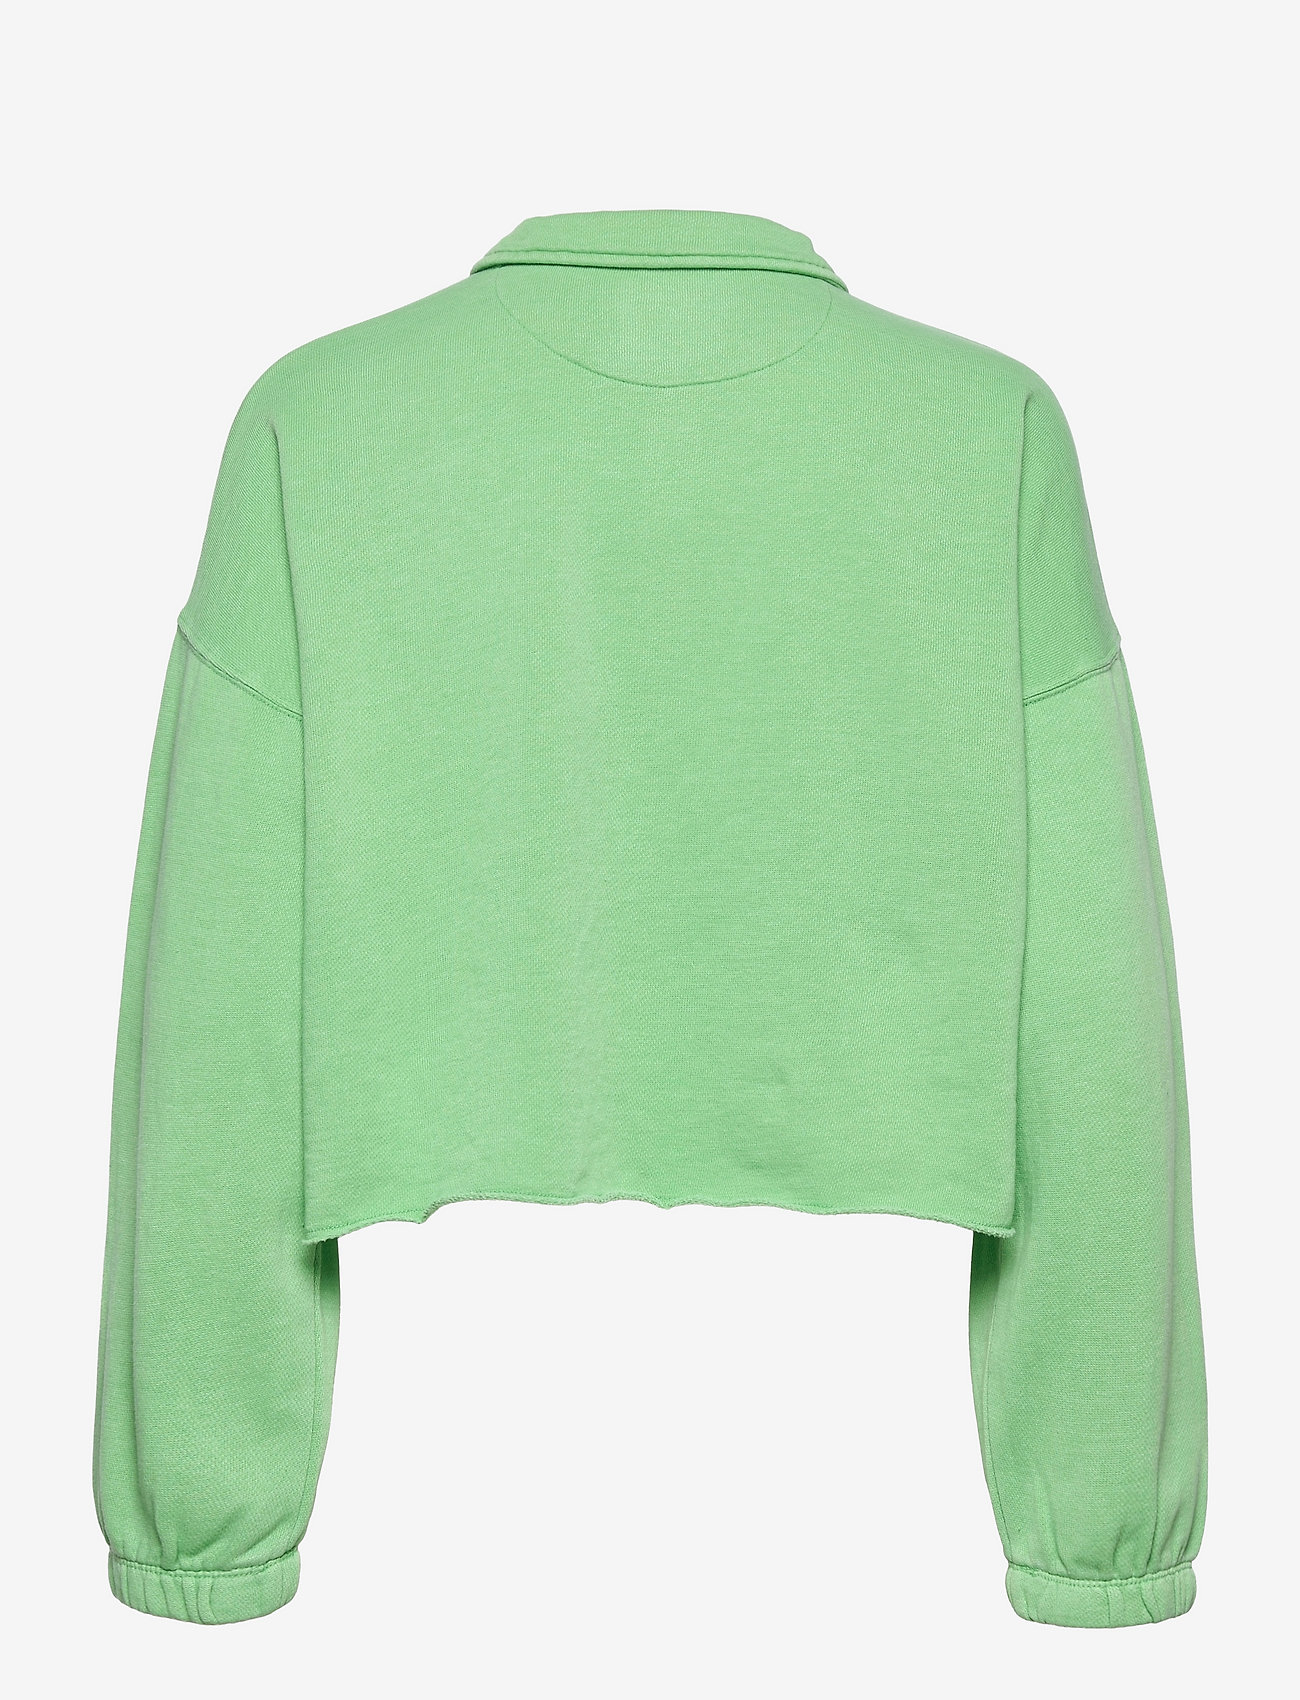 American Eagle - Aerie Fleece-Of-Mind Cropped Polo Sweatshirt - midday mint - 1